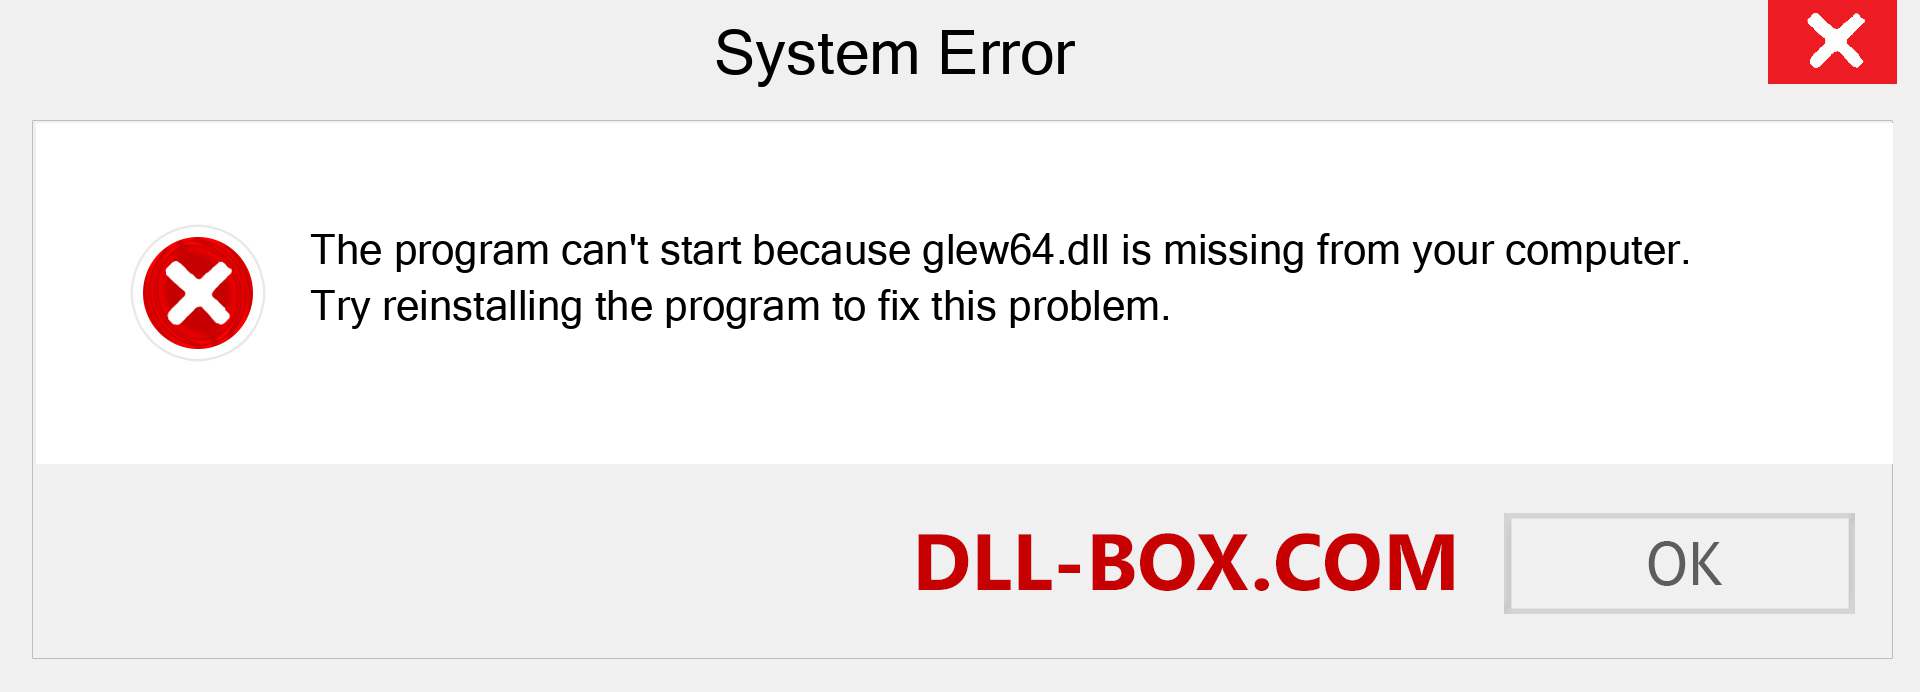  glew64.dll file is missing?. Download for Windows 7, 8, 10 - Fix  glew64 dll Missing Error on Windows, photos, images